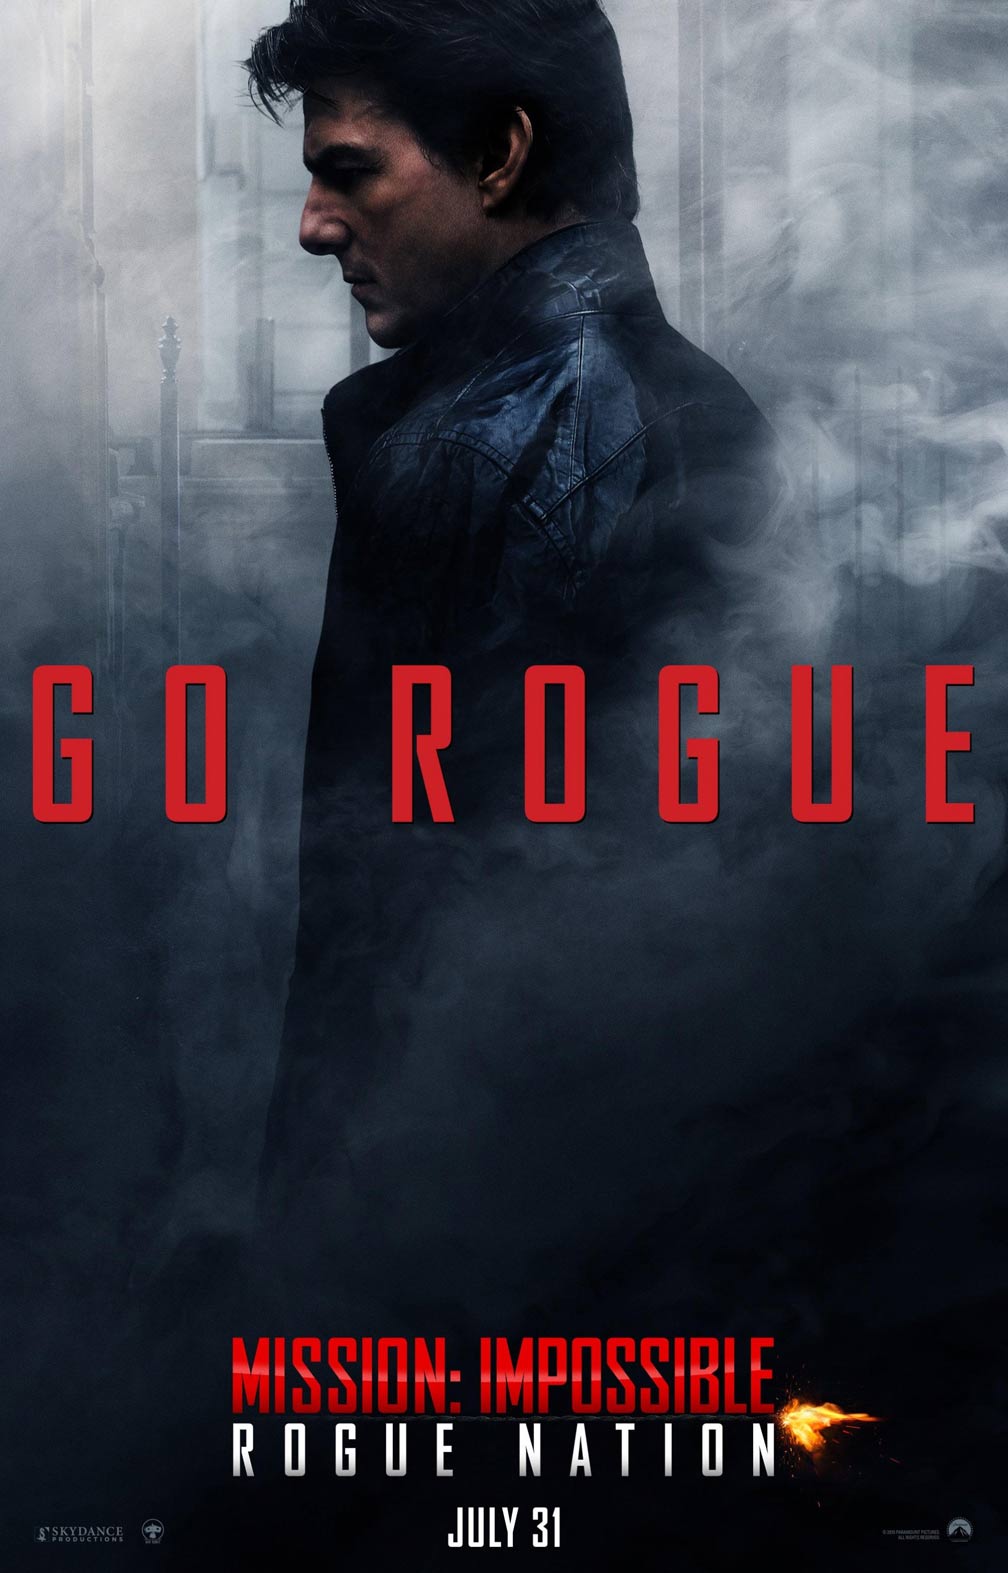 Mission Impossible Rogue Nation (2015) Poster 1 Trailer Addict